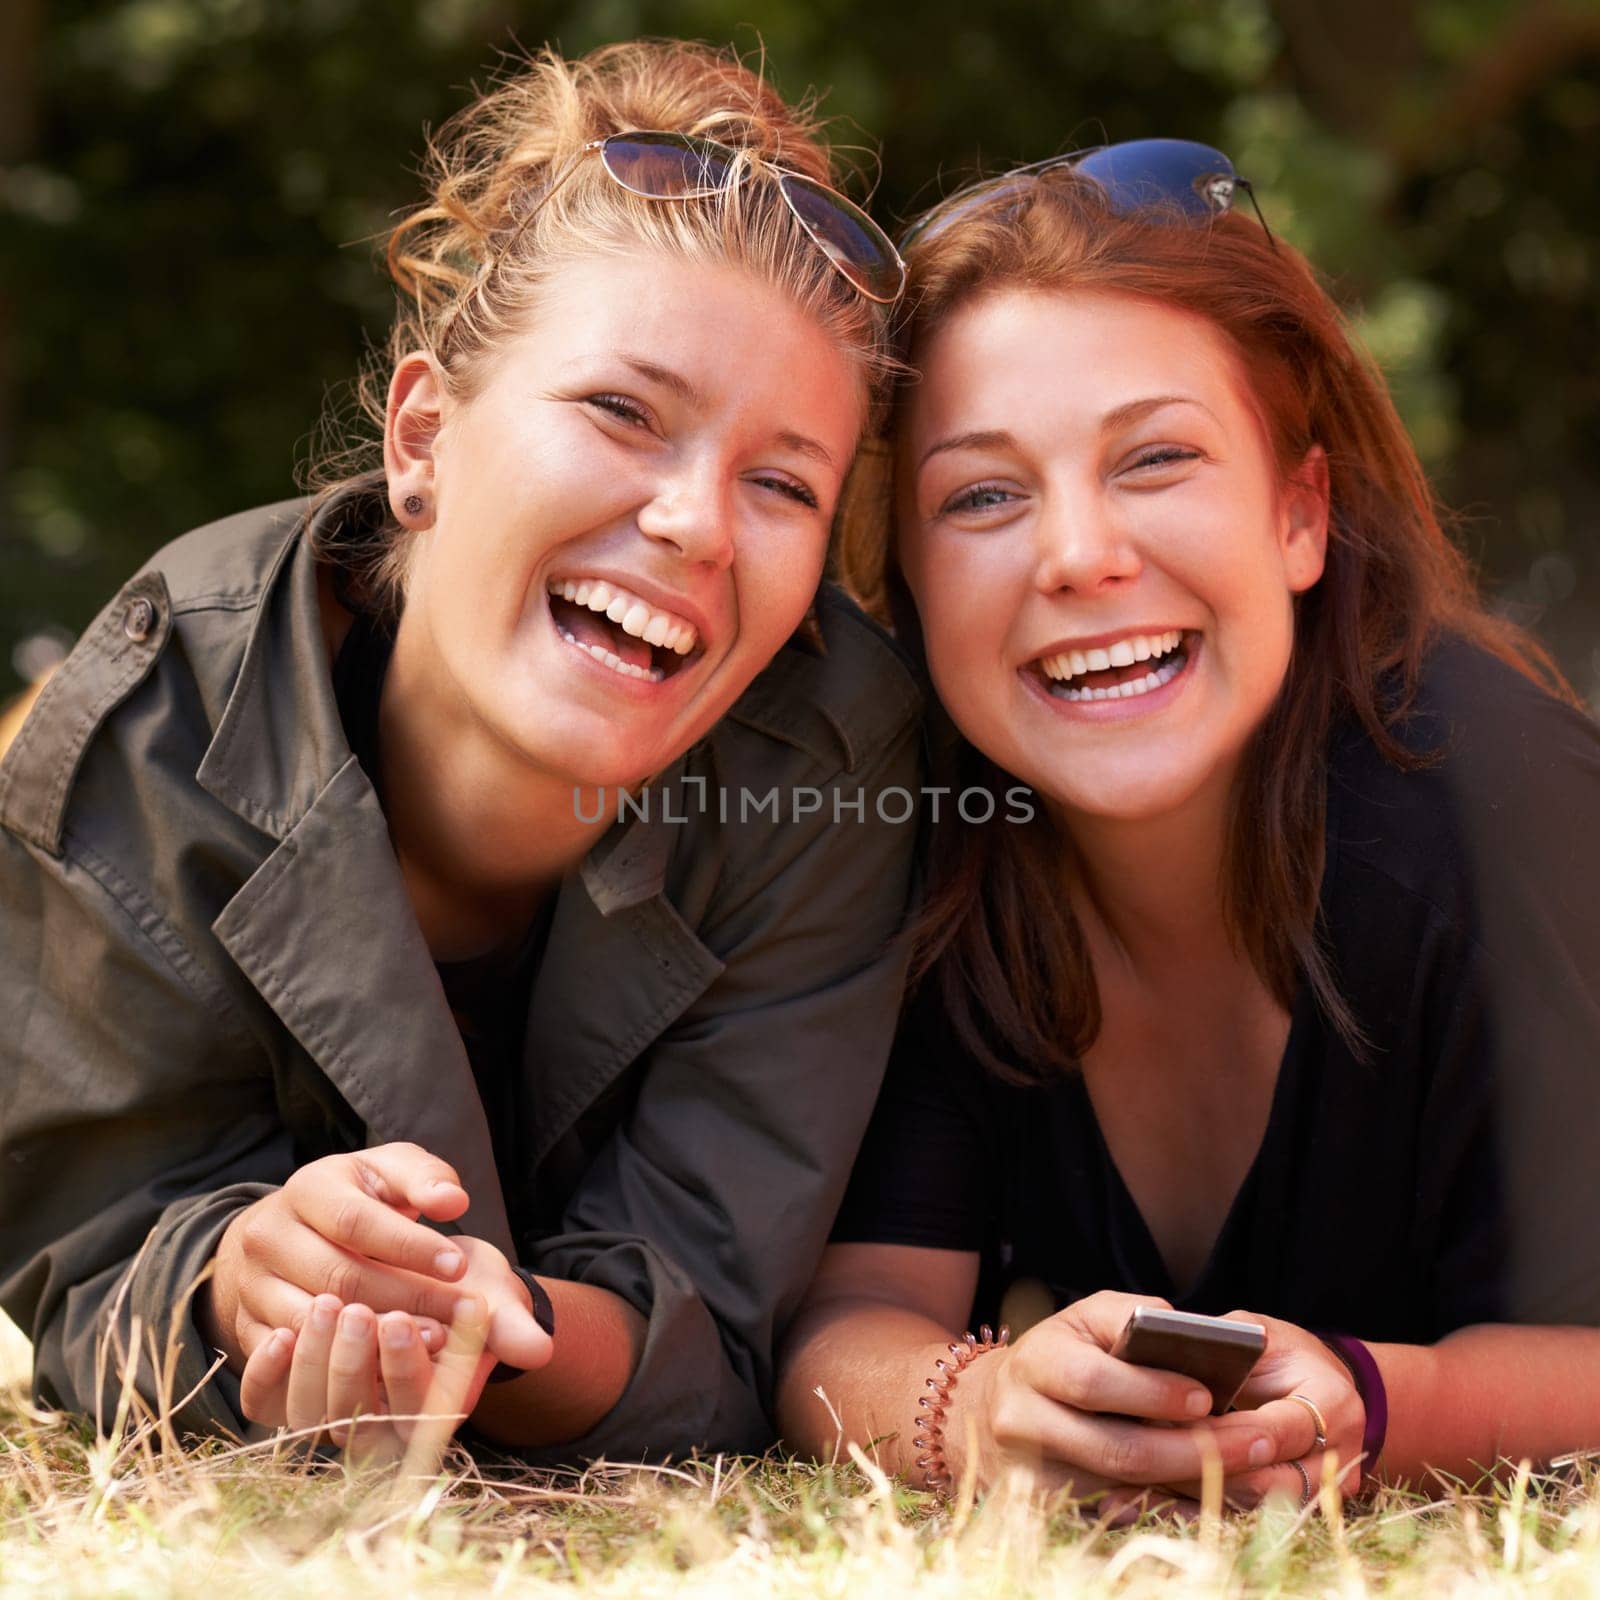 Portrait, outdoor and women on the grass with smile, funny or happiness with vacation, relax or bonding together. Face, people on the ground or girls with joy, weekend break or getaway with summer.